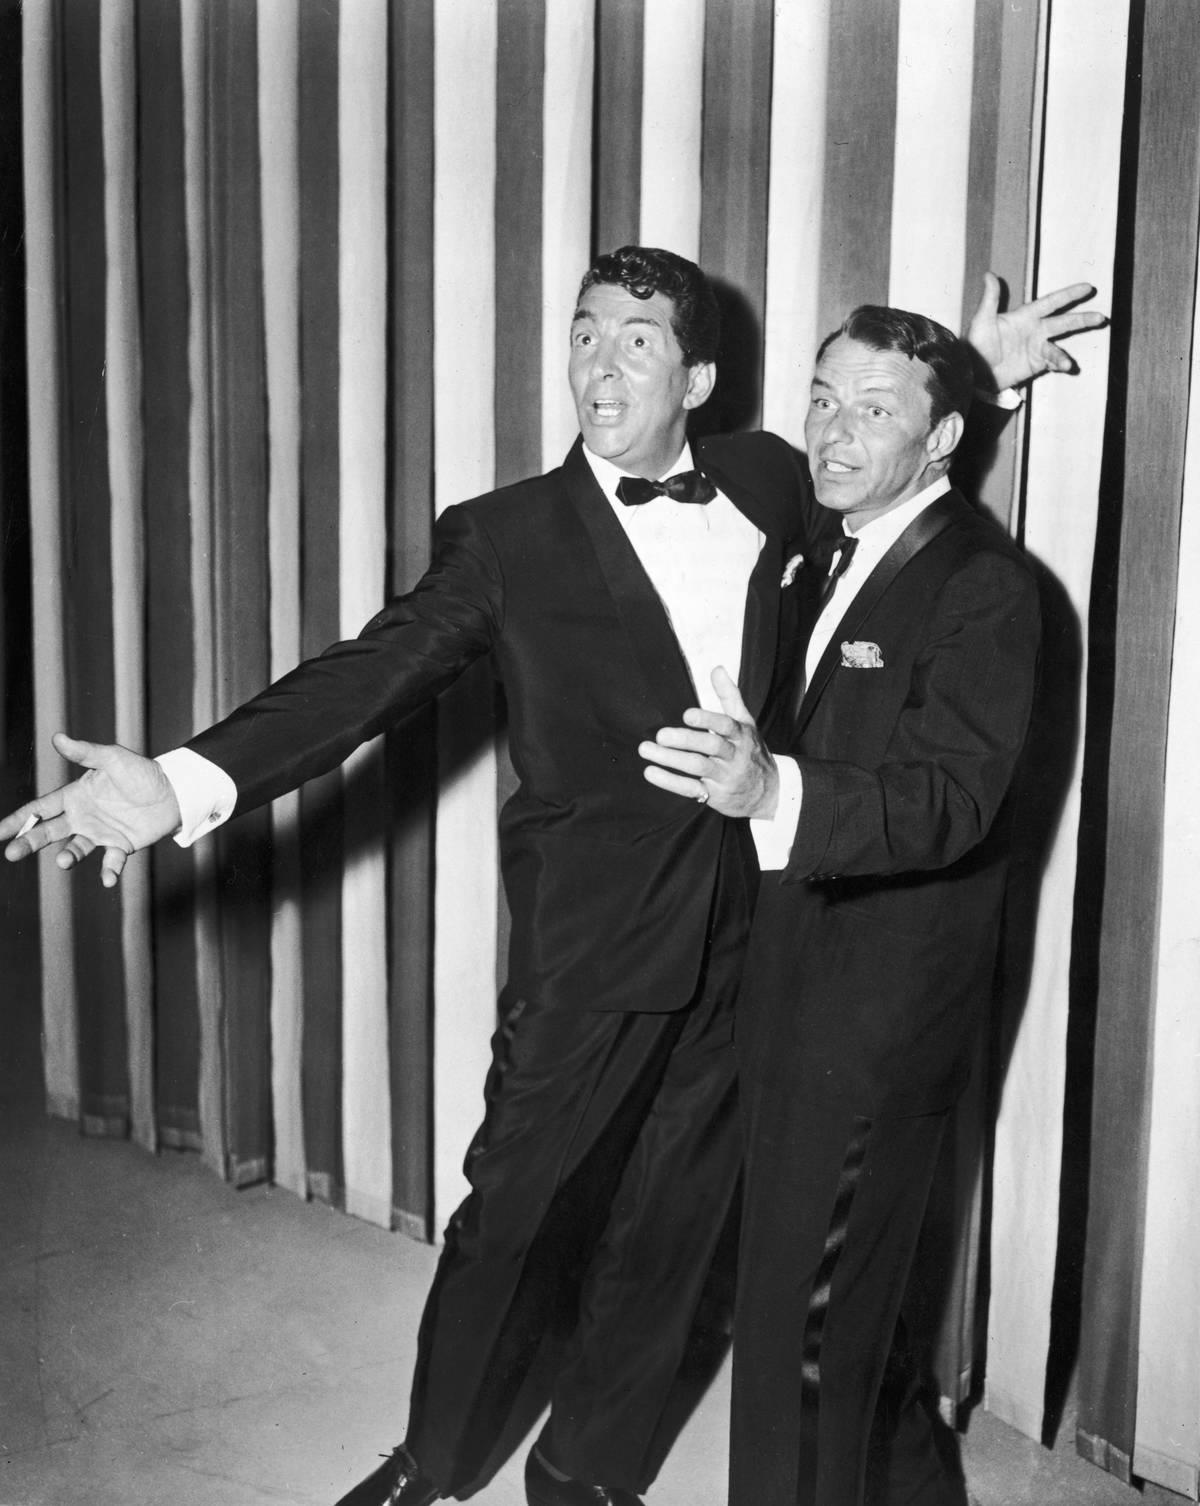 <p>Two members of the legendary Rat Pack, Dean Martin and Frank Sinatra, are seen goofing off on the variety television program <i>The Dean Martin Show</i>.</p> <p>While they were both singers, their love of entertainment brought them in front of the camera and all the small and silver screen numerous times throughout their respective careers.</p>